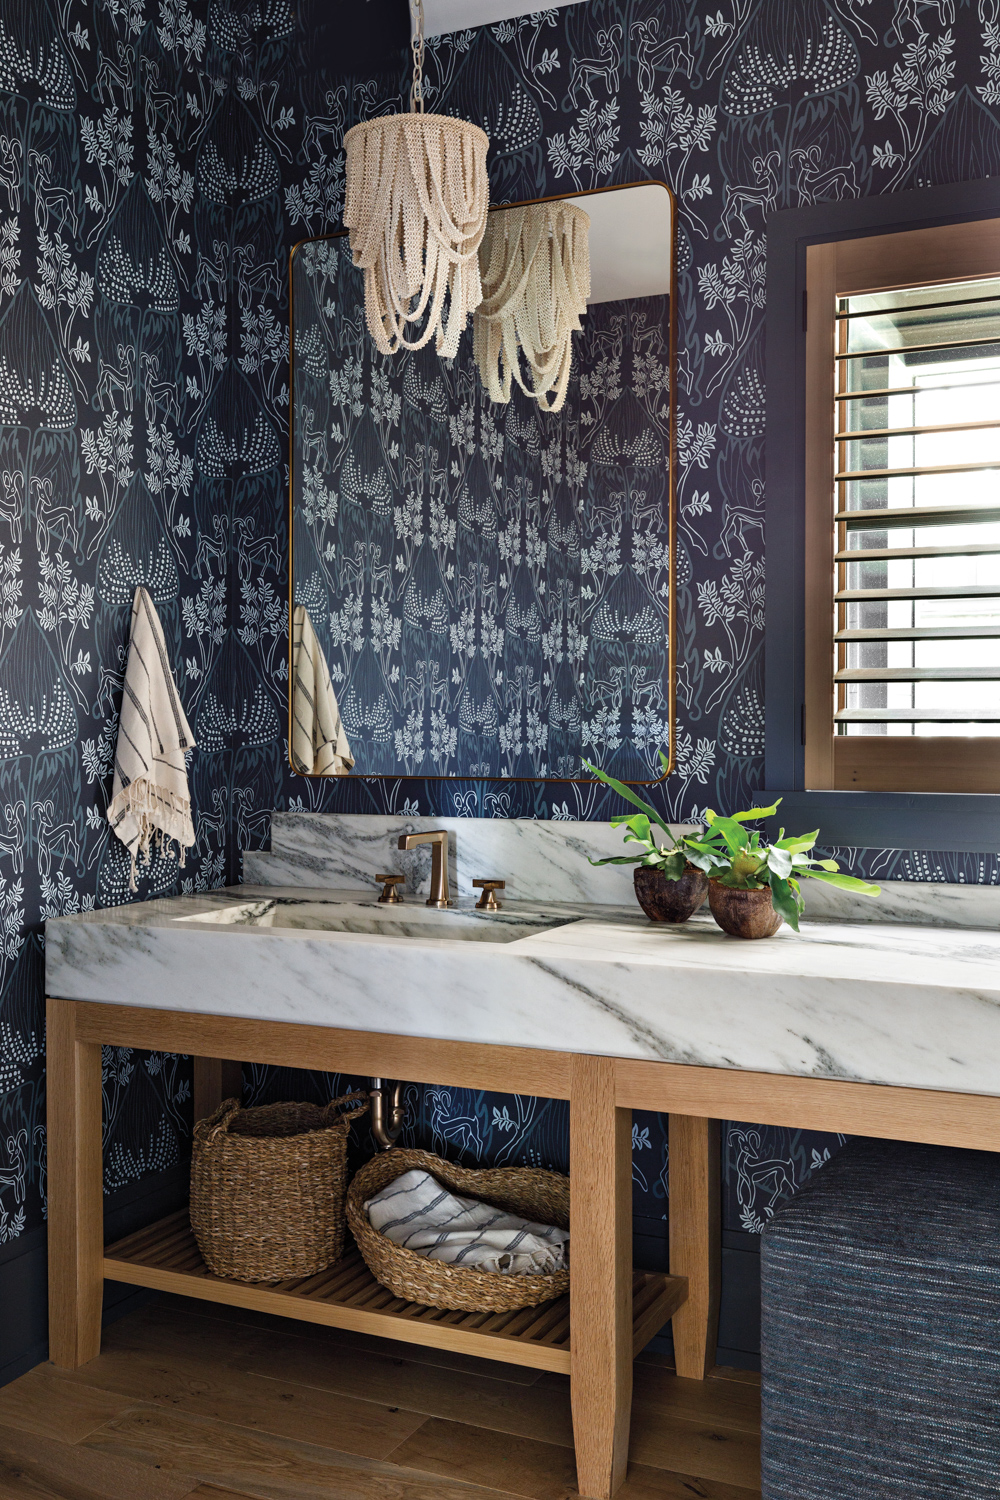 Powder room with blue-and-white floral...